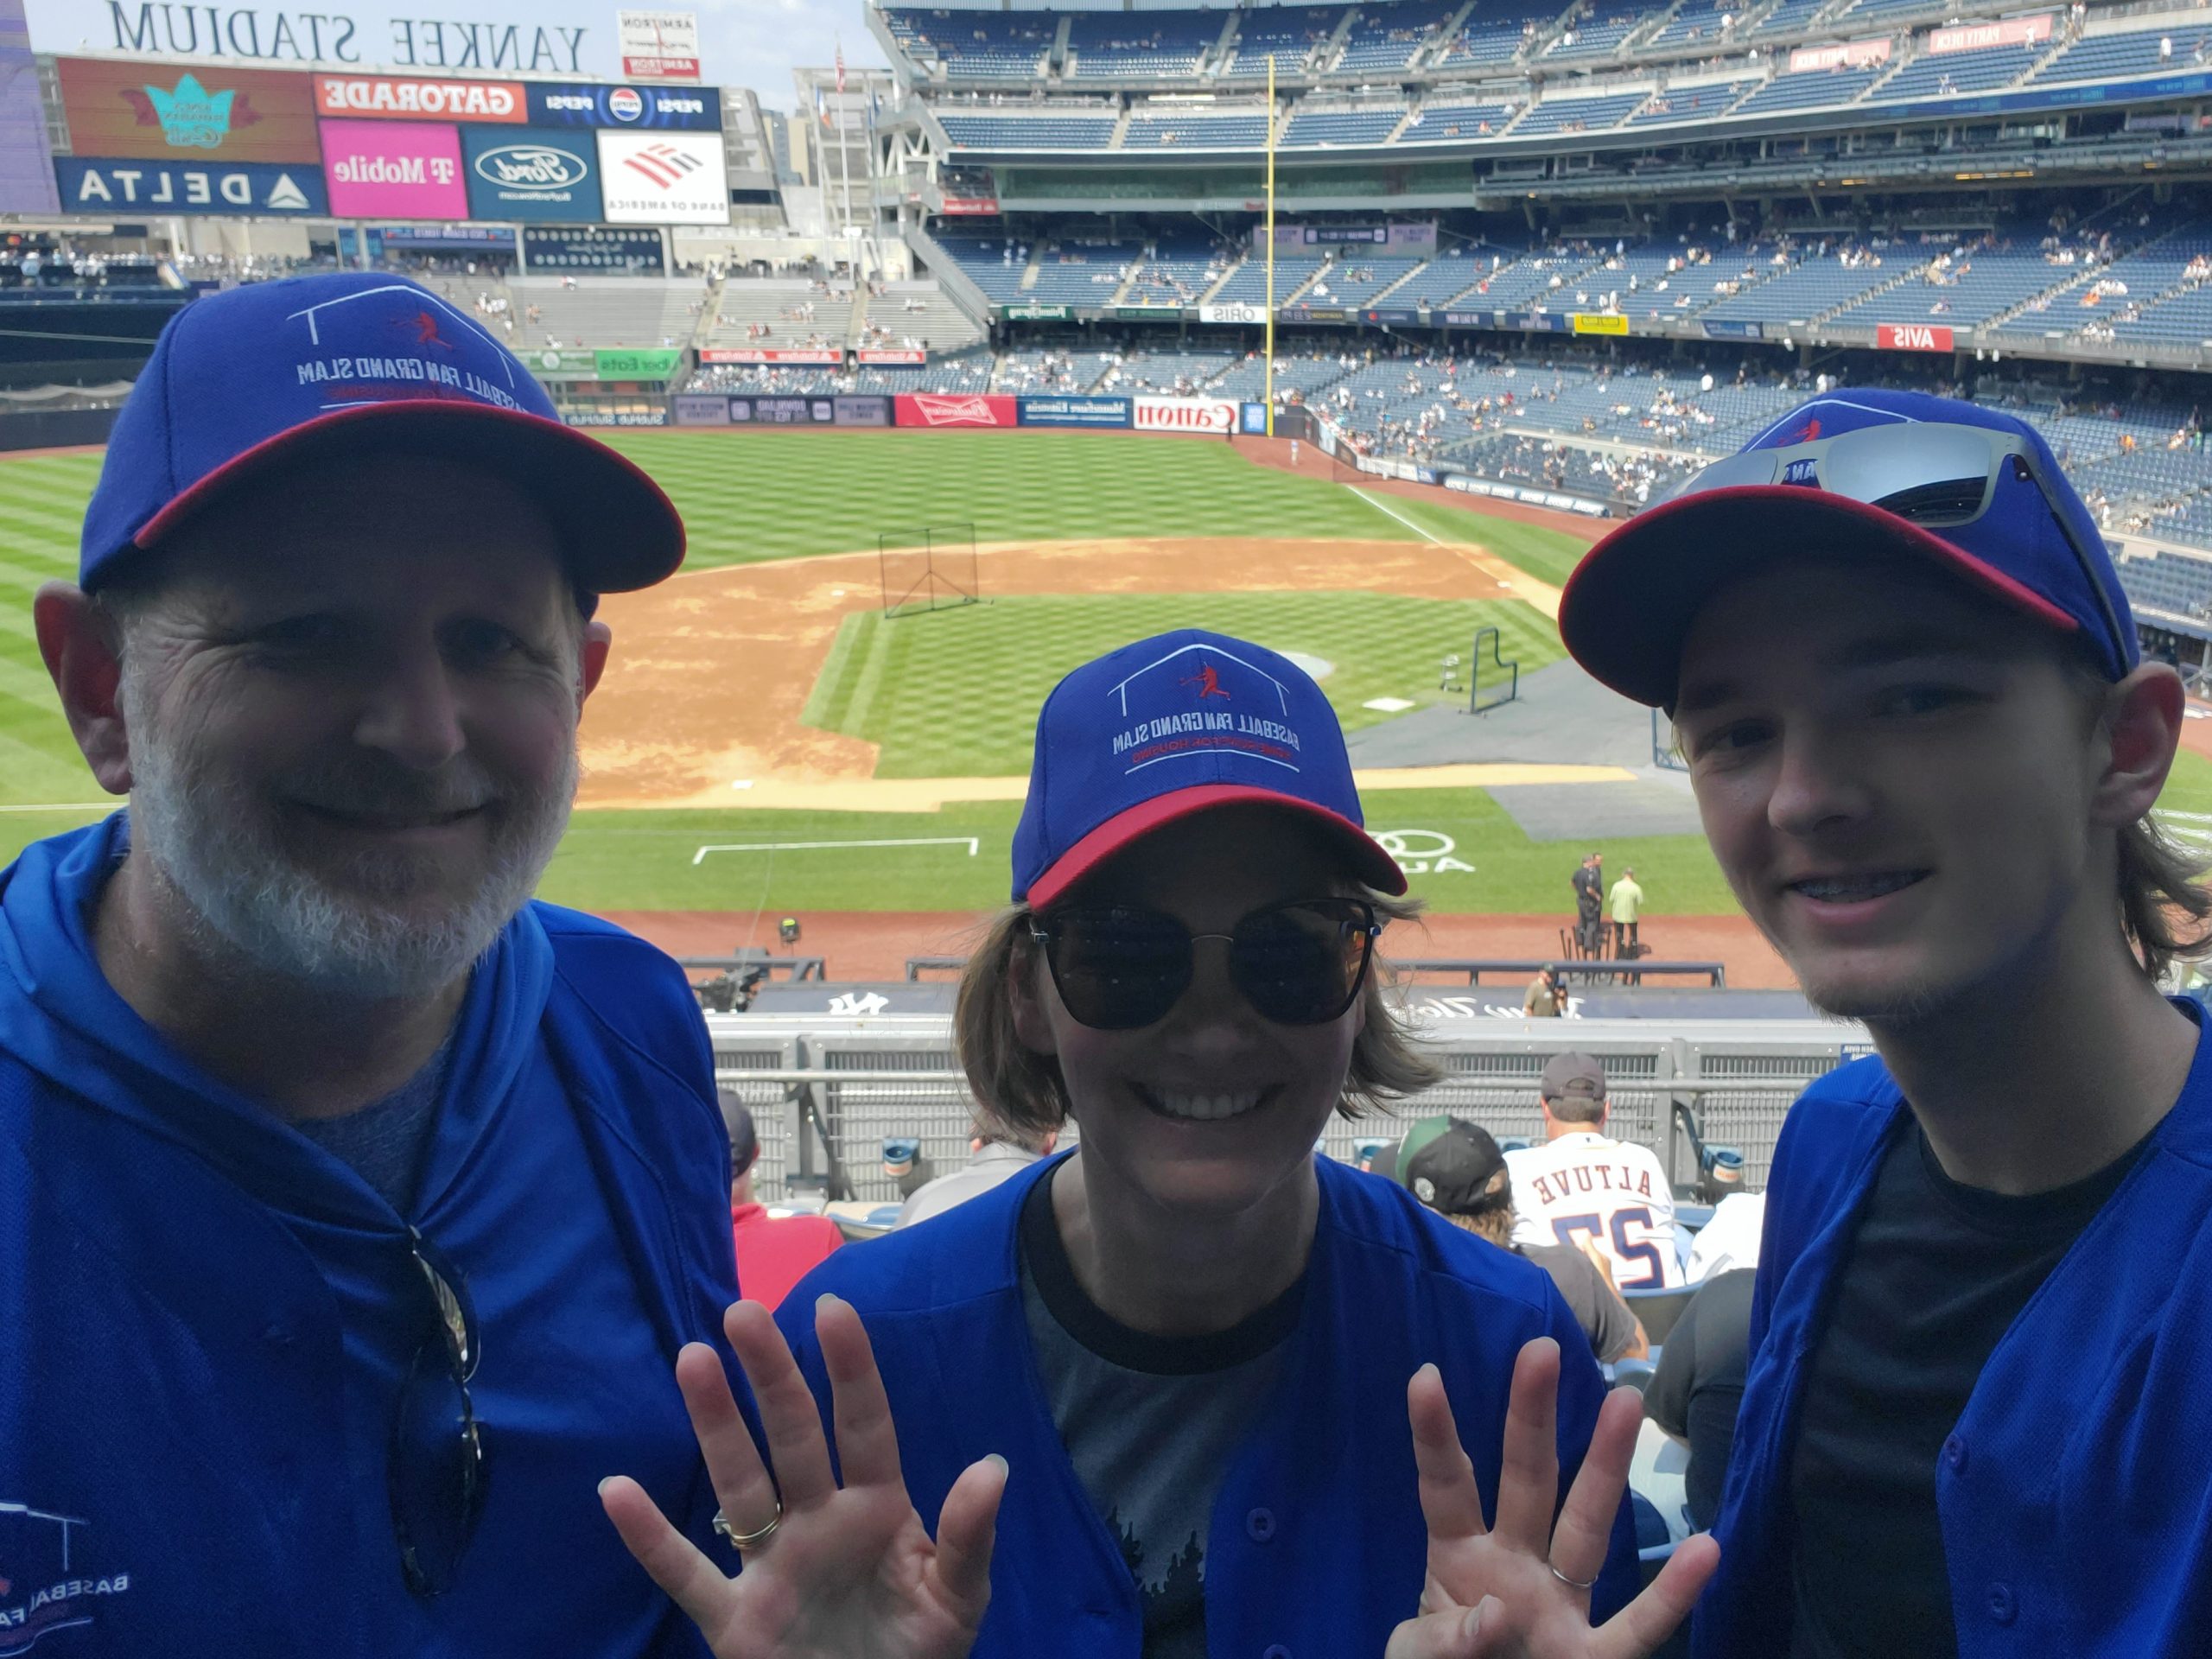 Brad, Heather & Ryan in front of the diamond at Yankee Stadium with 9 fingers up to represent the ninth stadium on the tour!